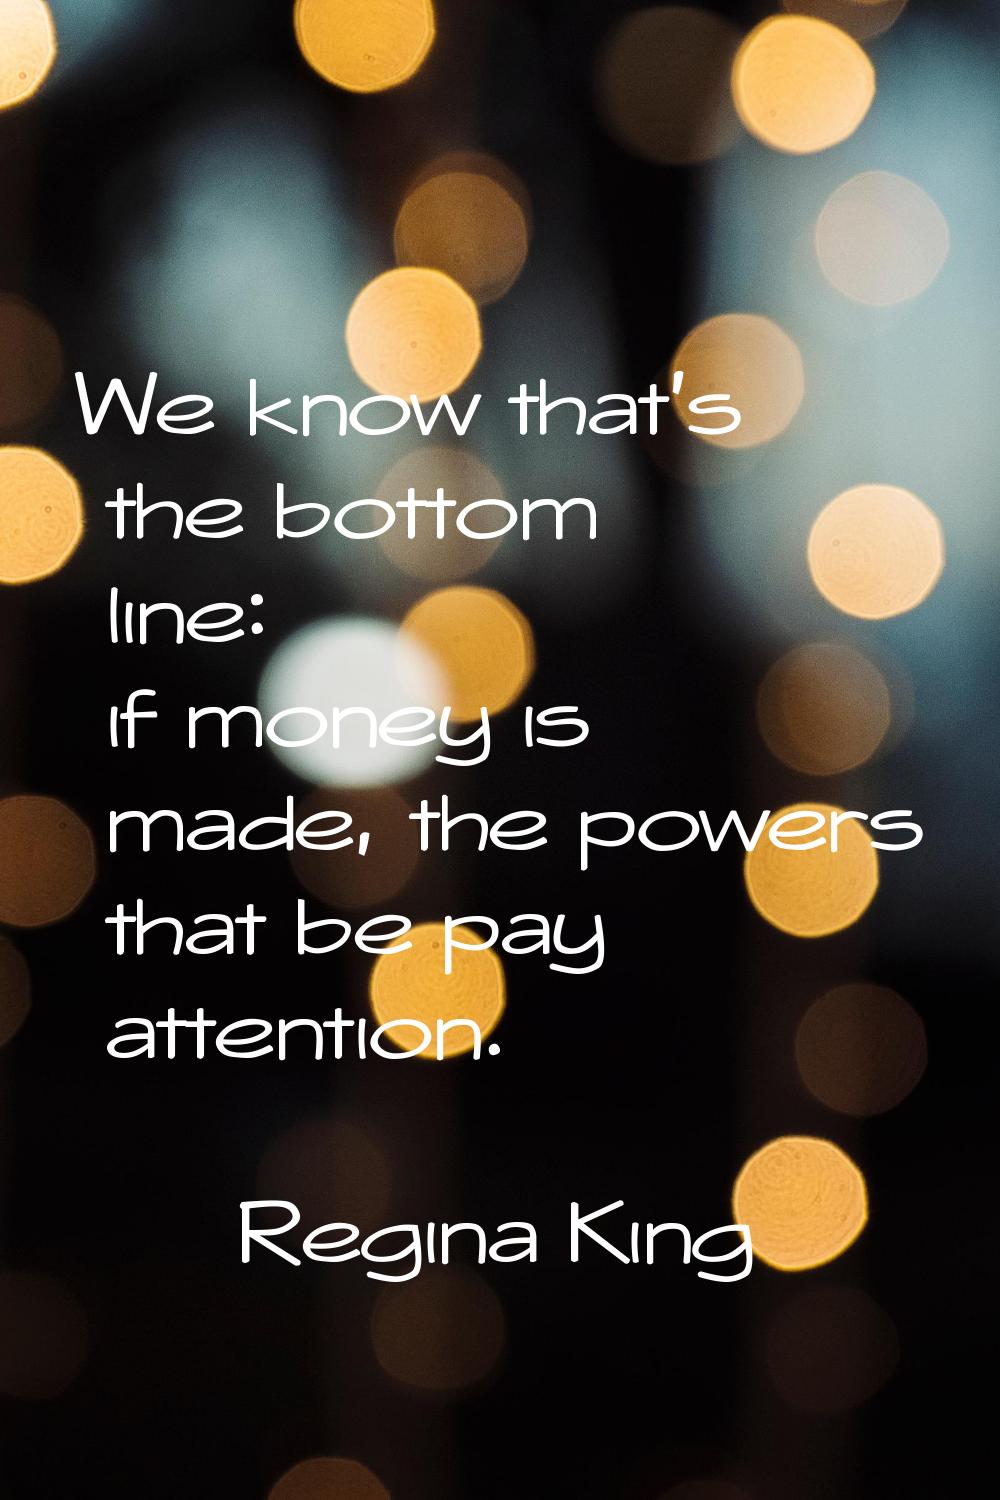 We know that's the bottom line: if money is made, the powers that be pay attention.